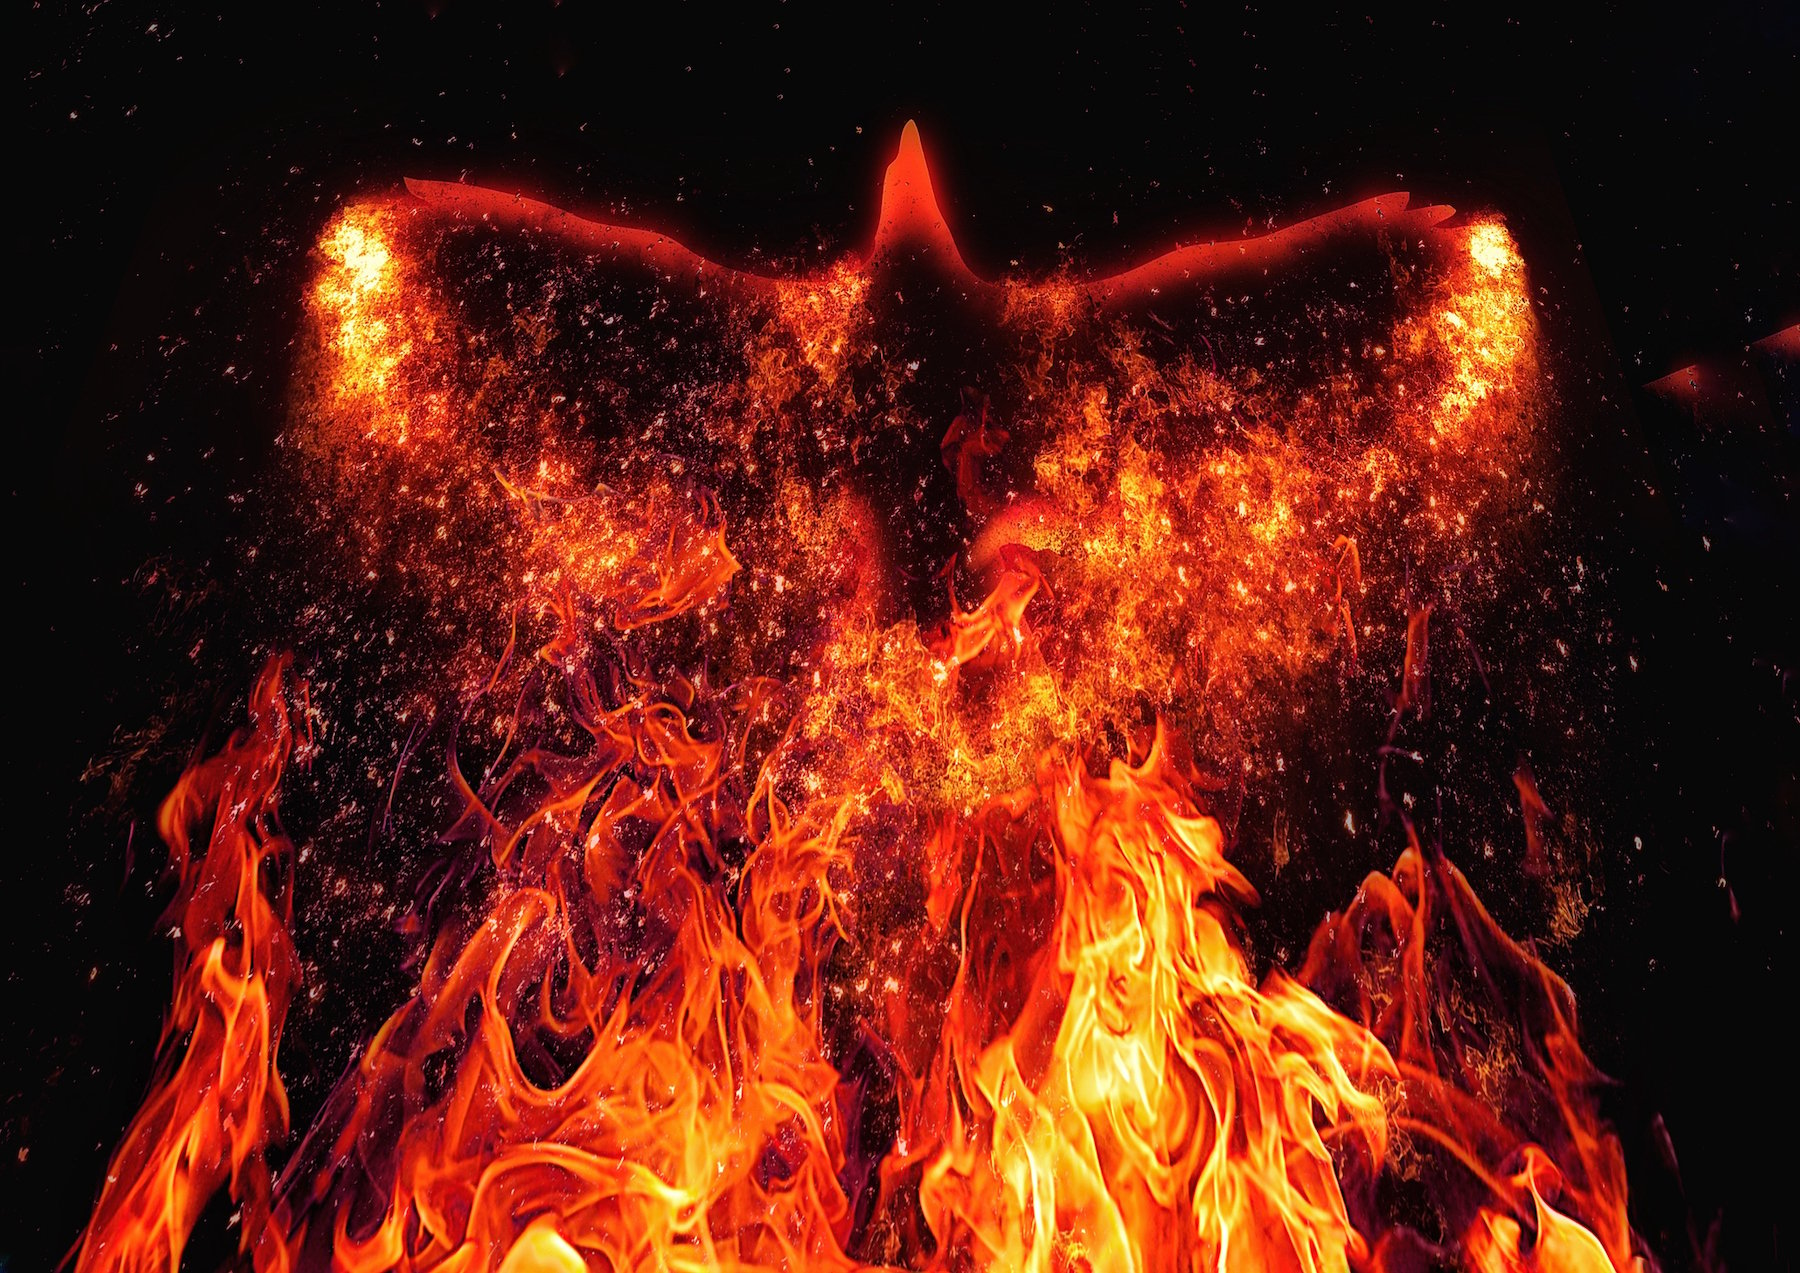 Graphic image of a phoenix rising out of flames